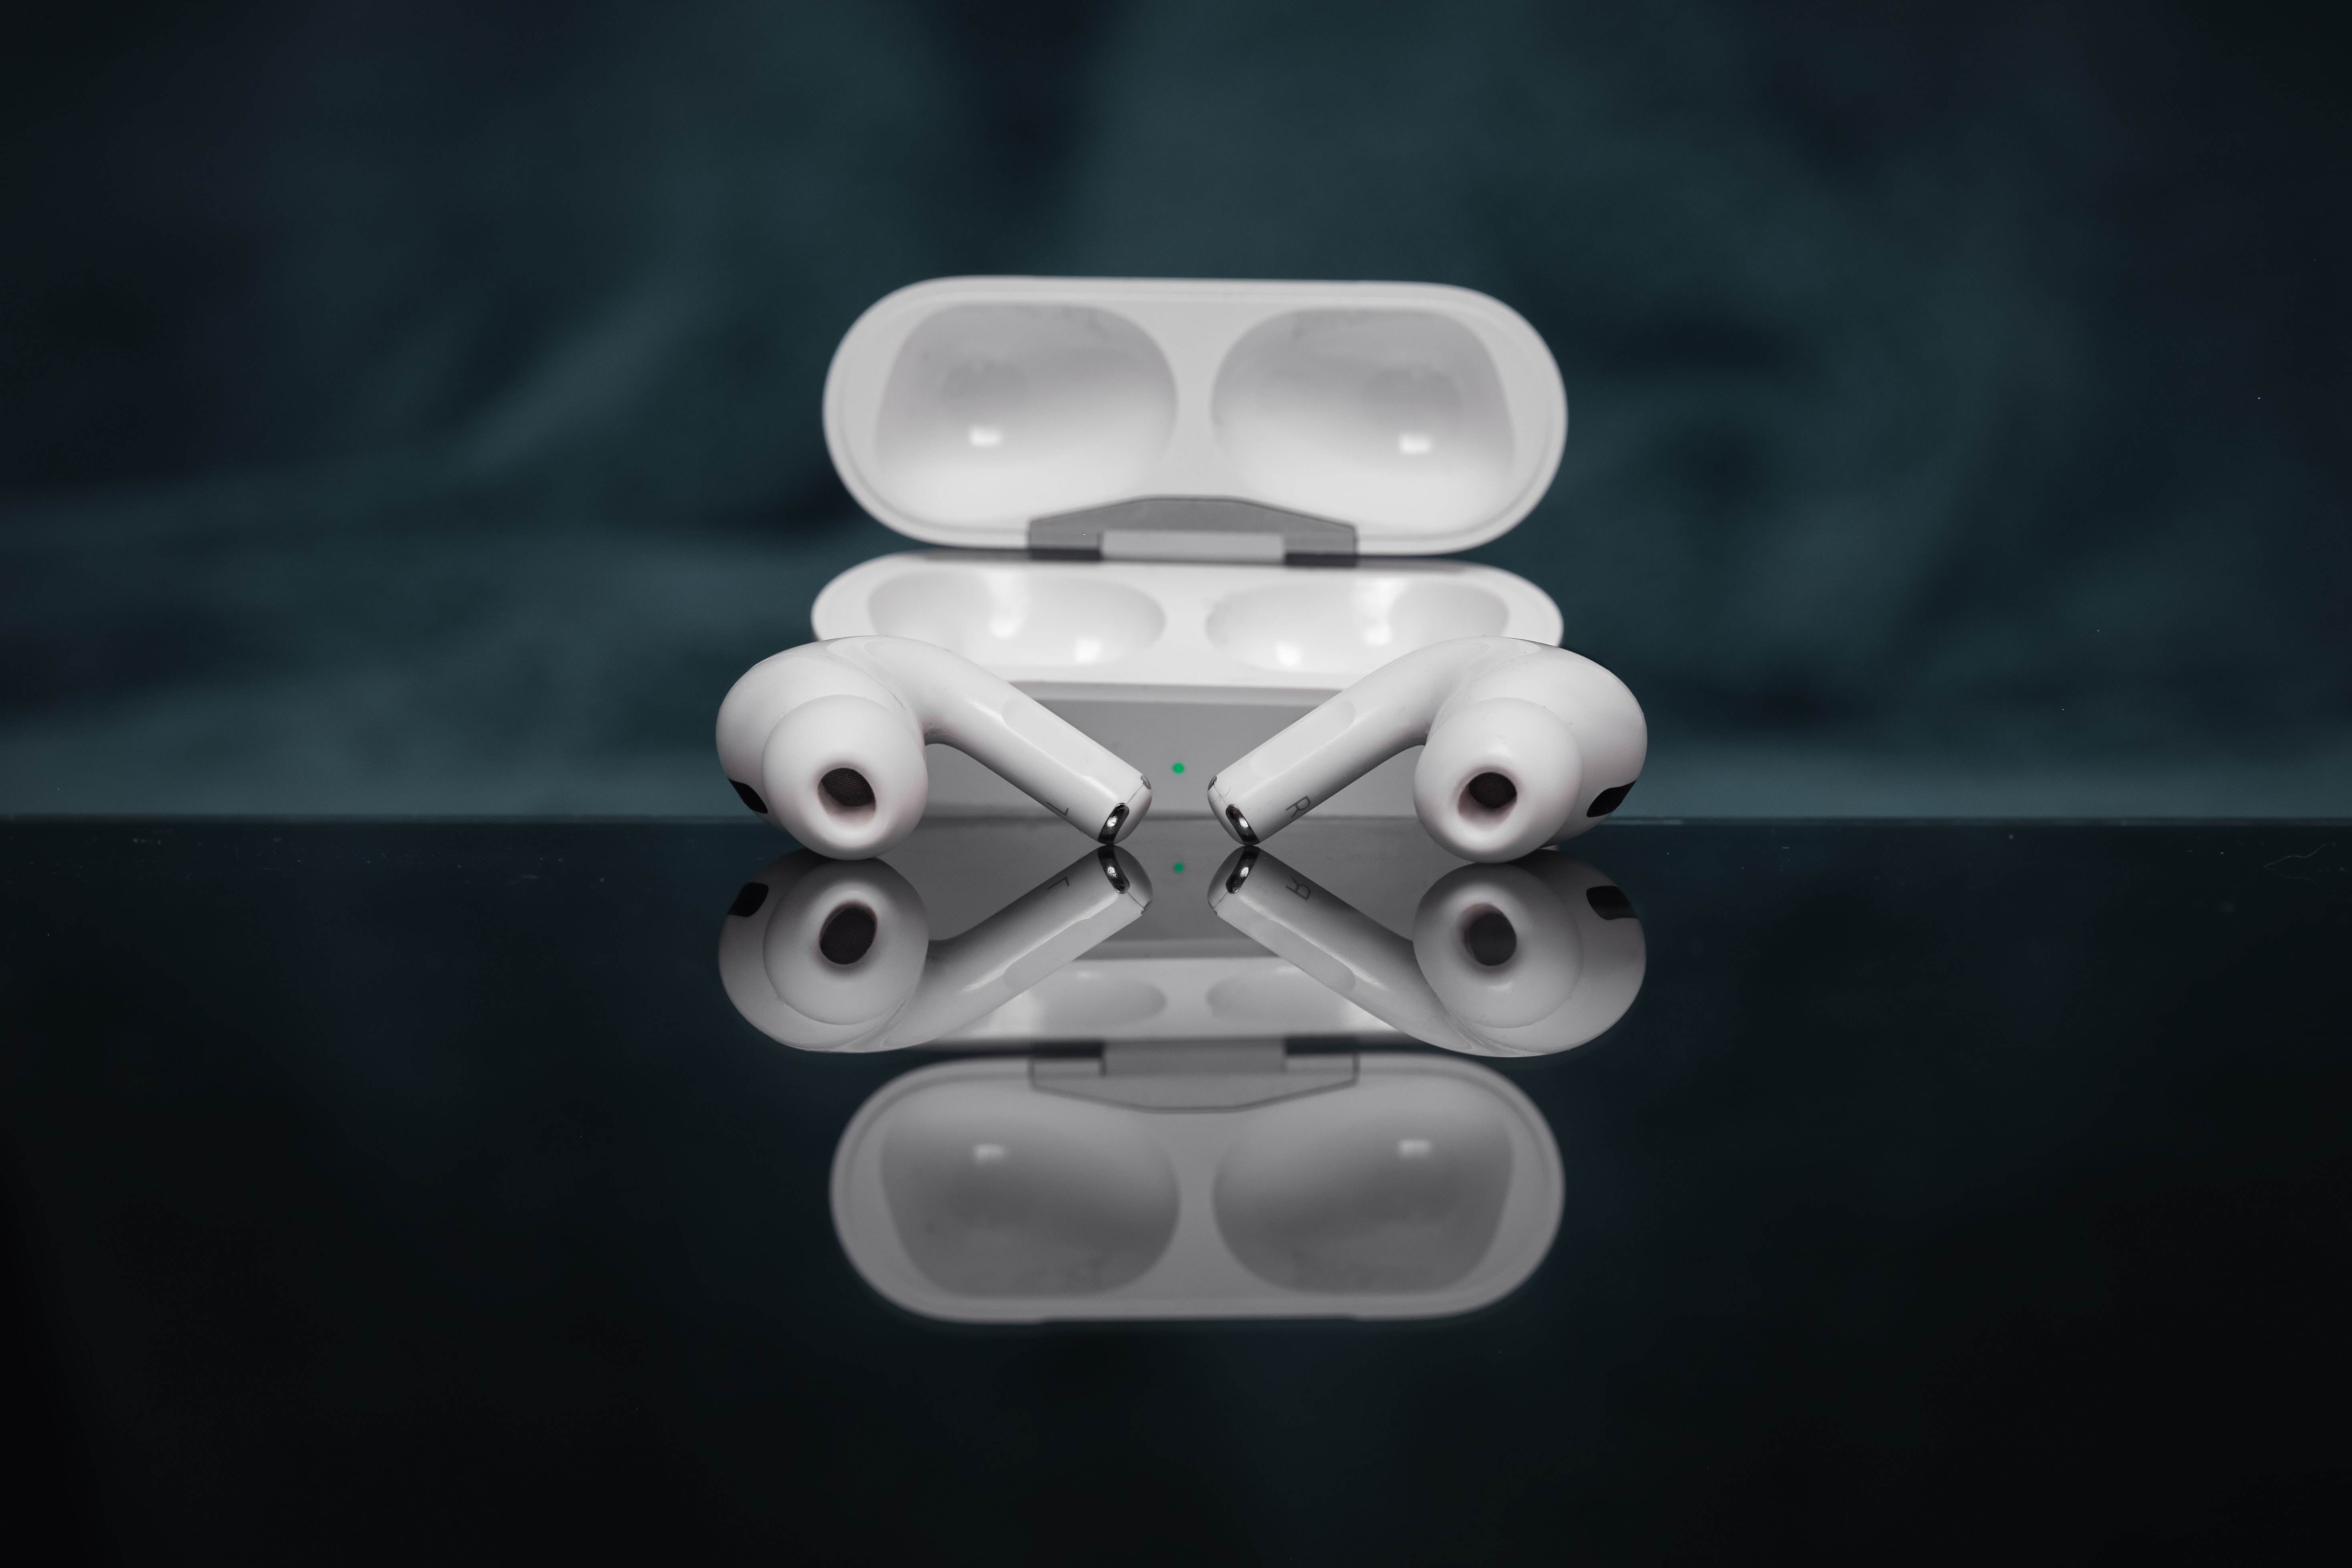 Apple leaks suggest a new redesigned rounded AirPods Pro